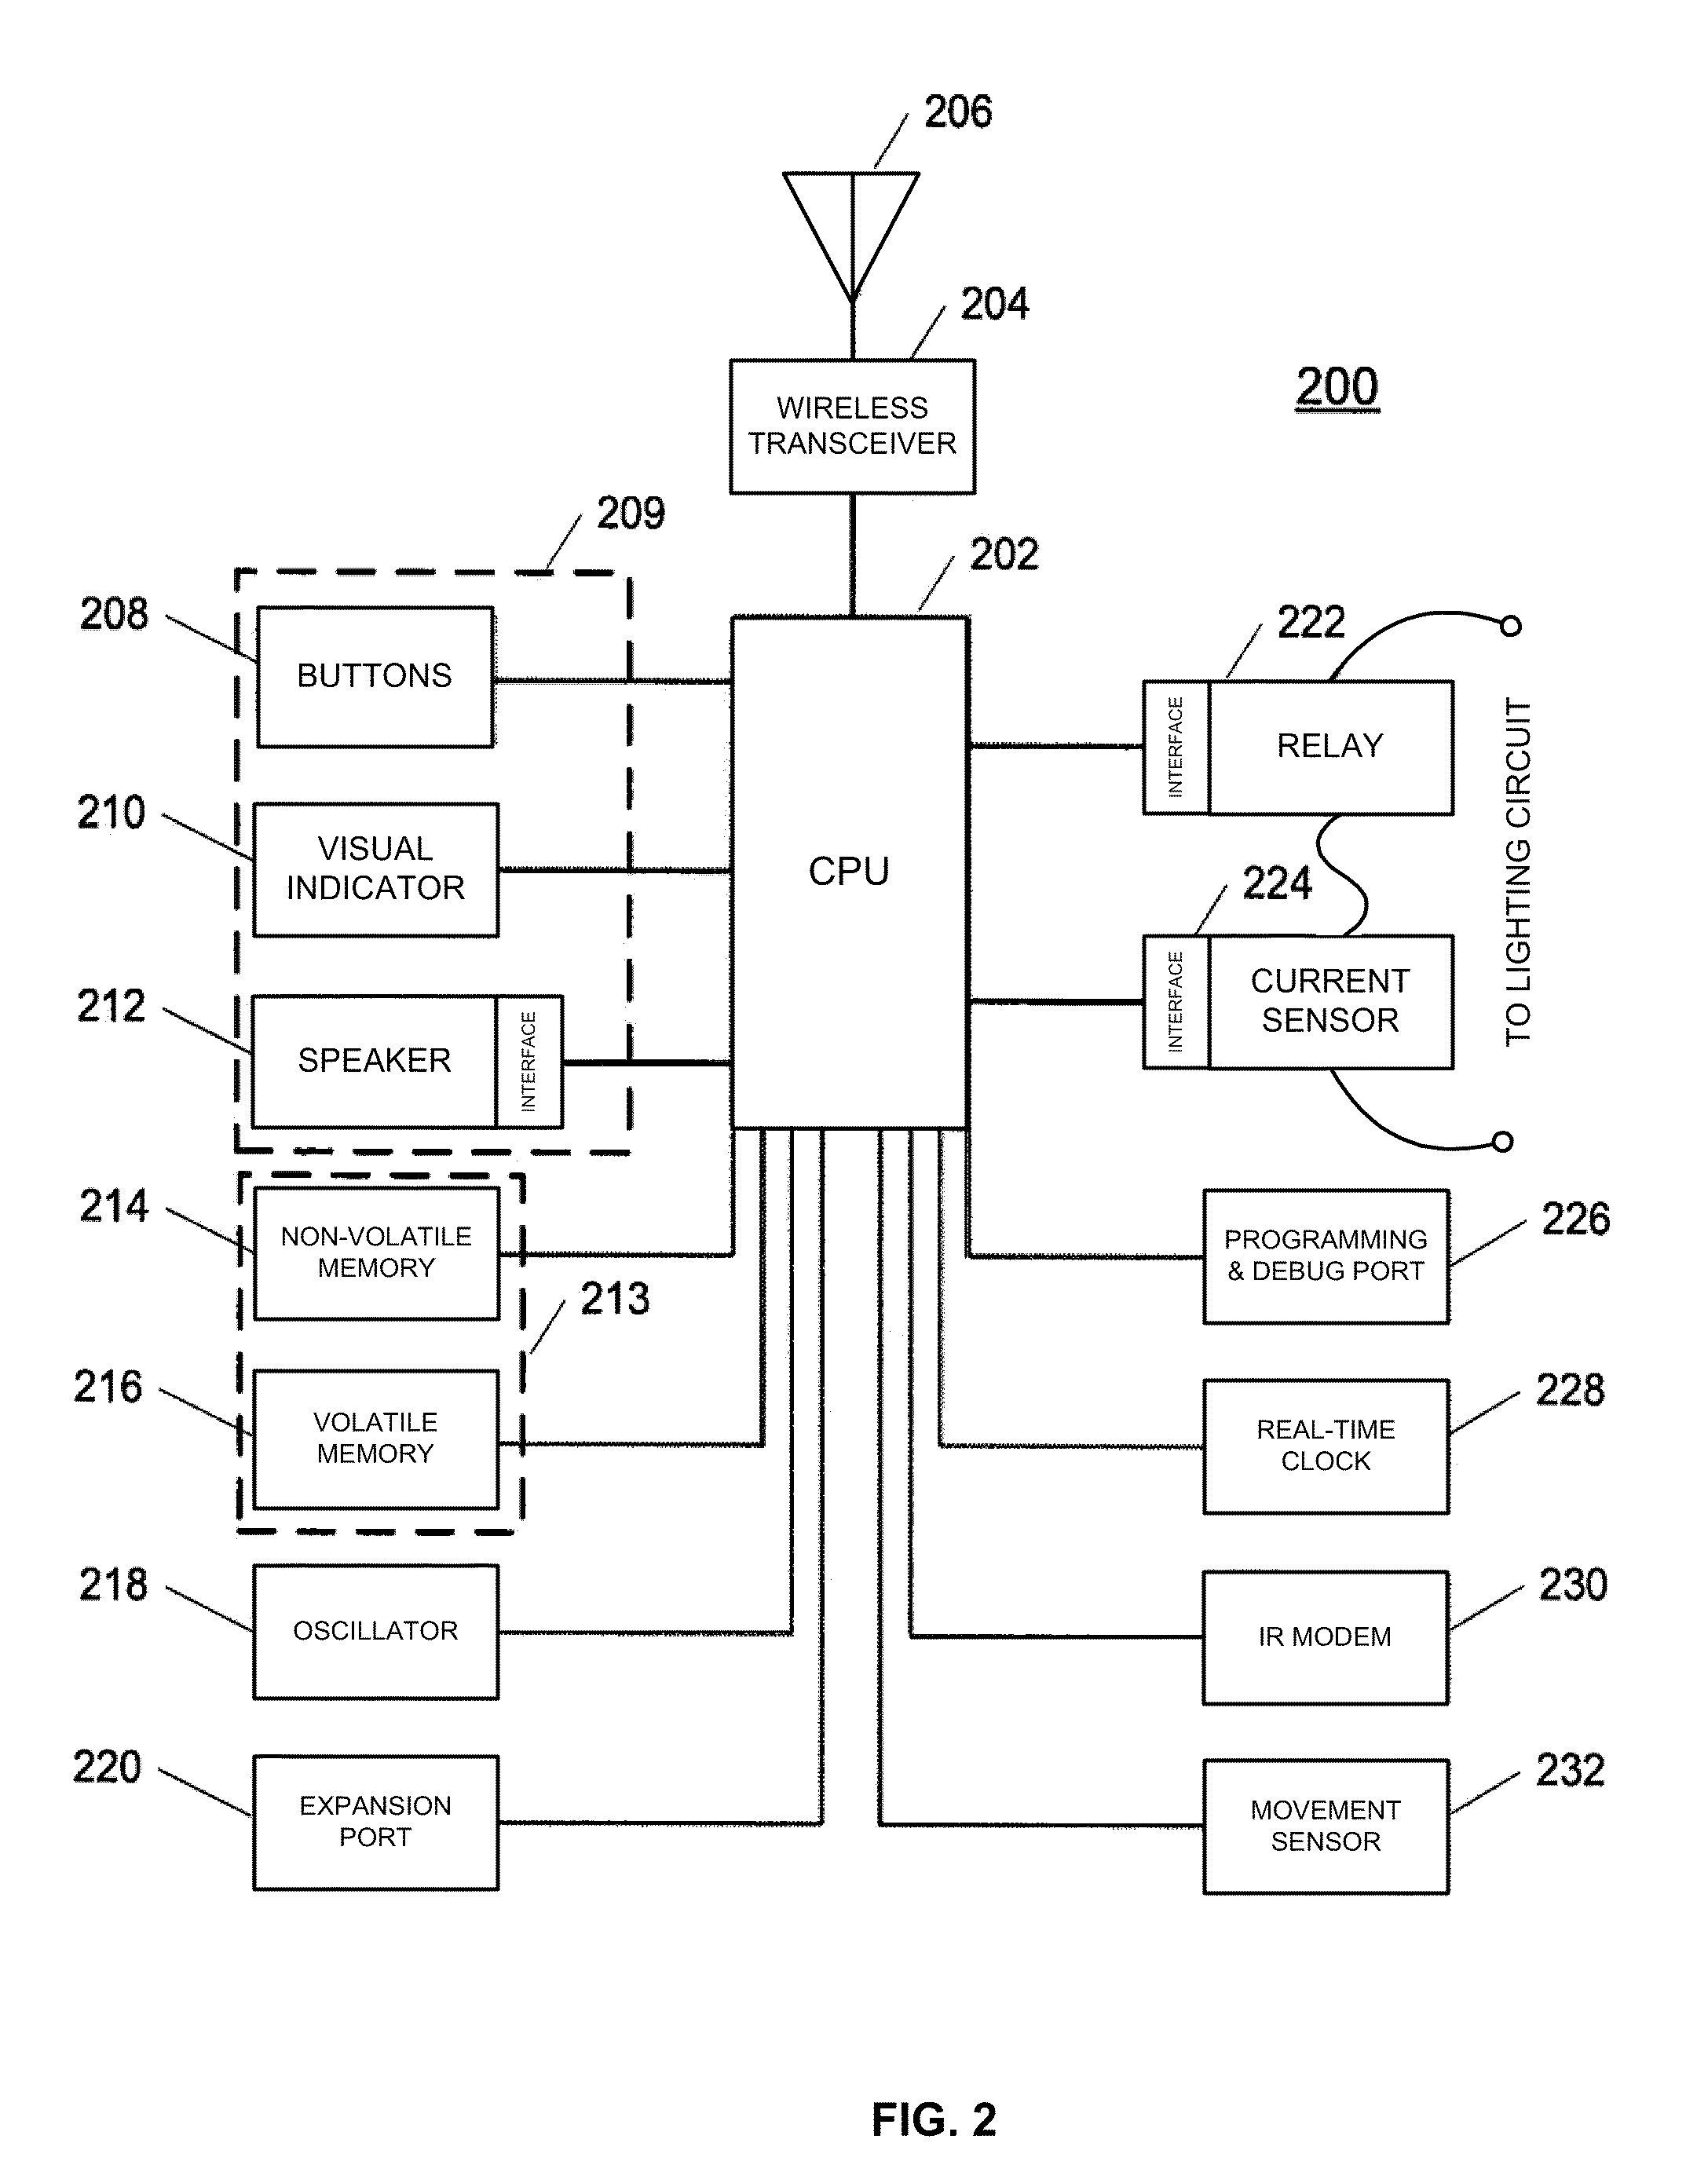 Systems and methods for rules based, automated lighting control